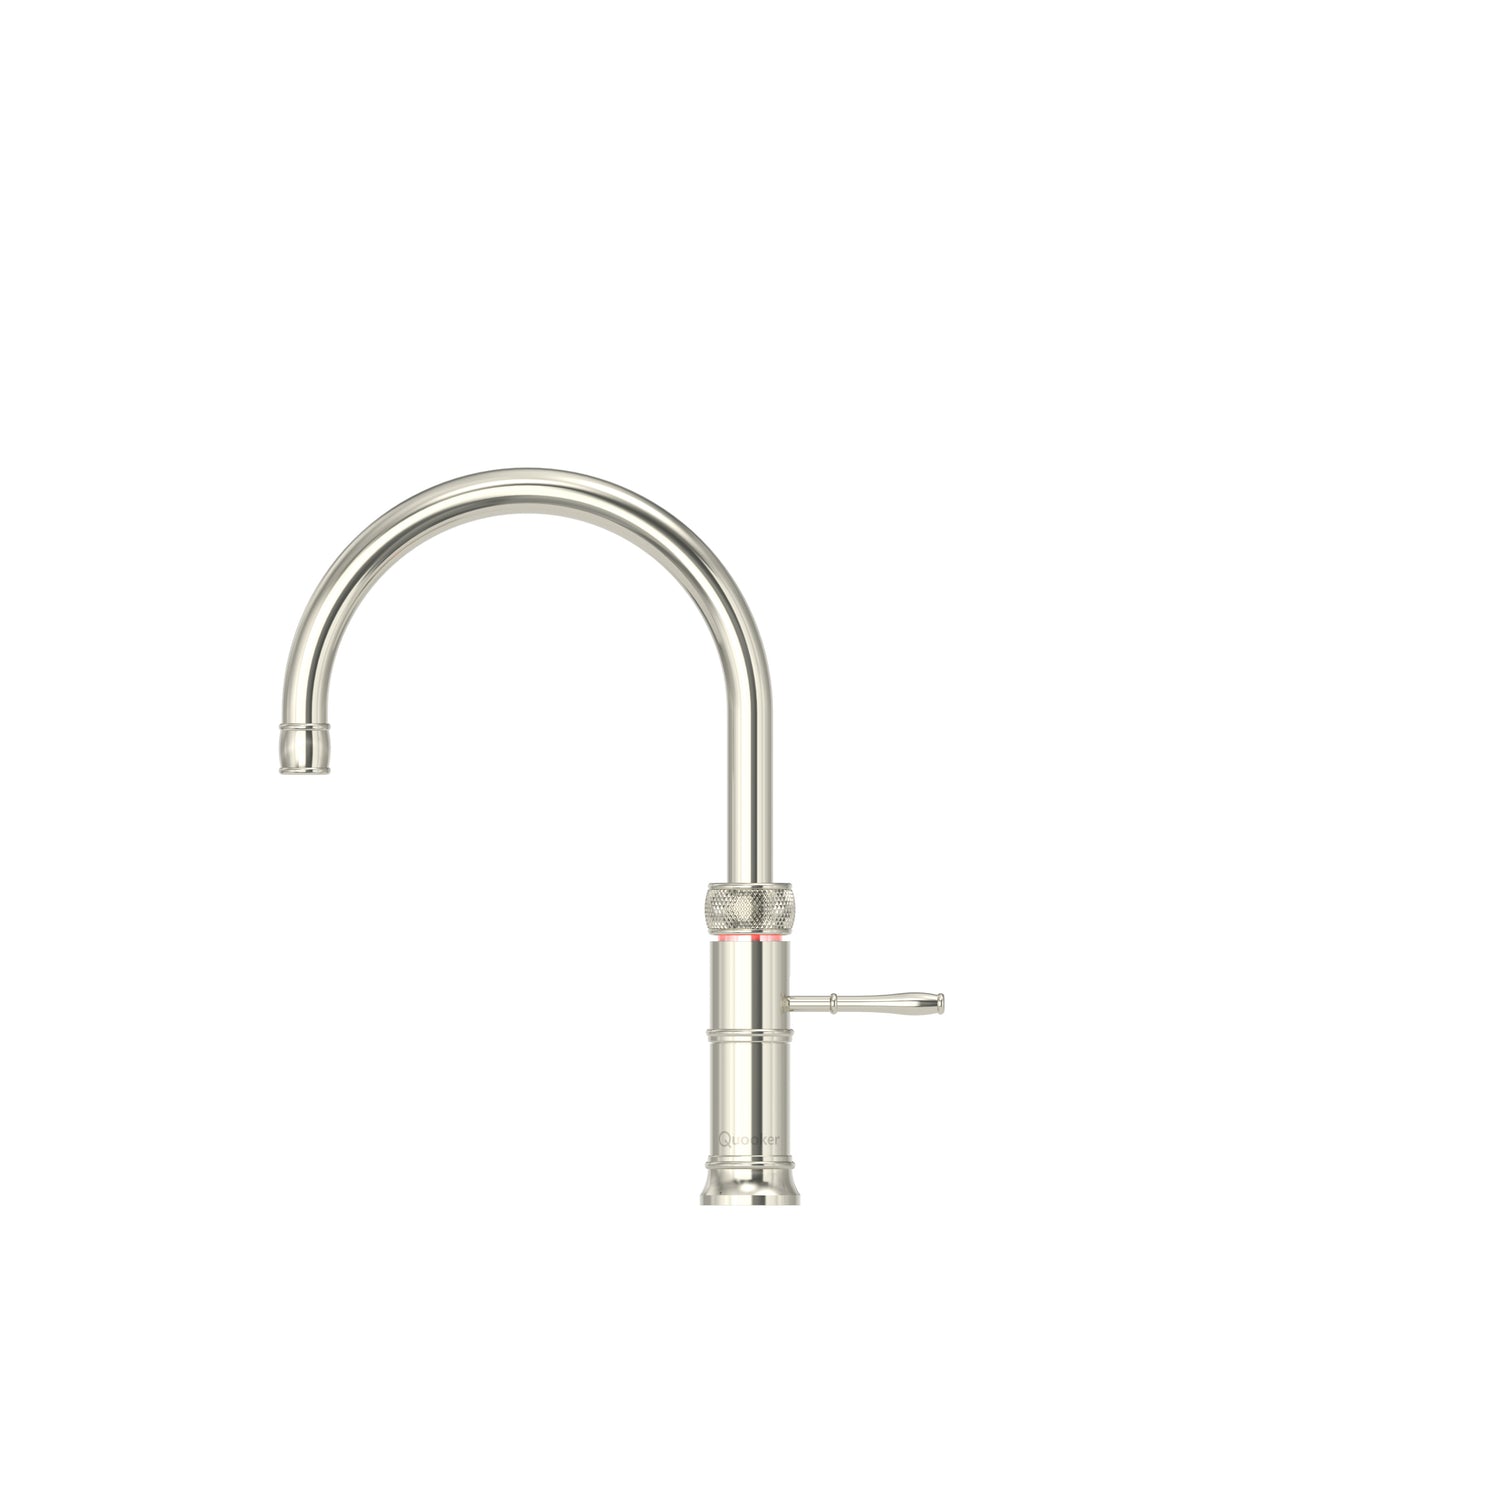 Quooker Classic Fusion Round Tap finished in nickel.